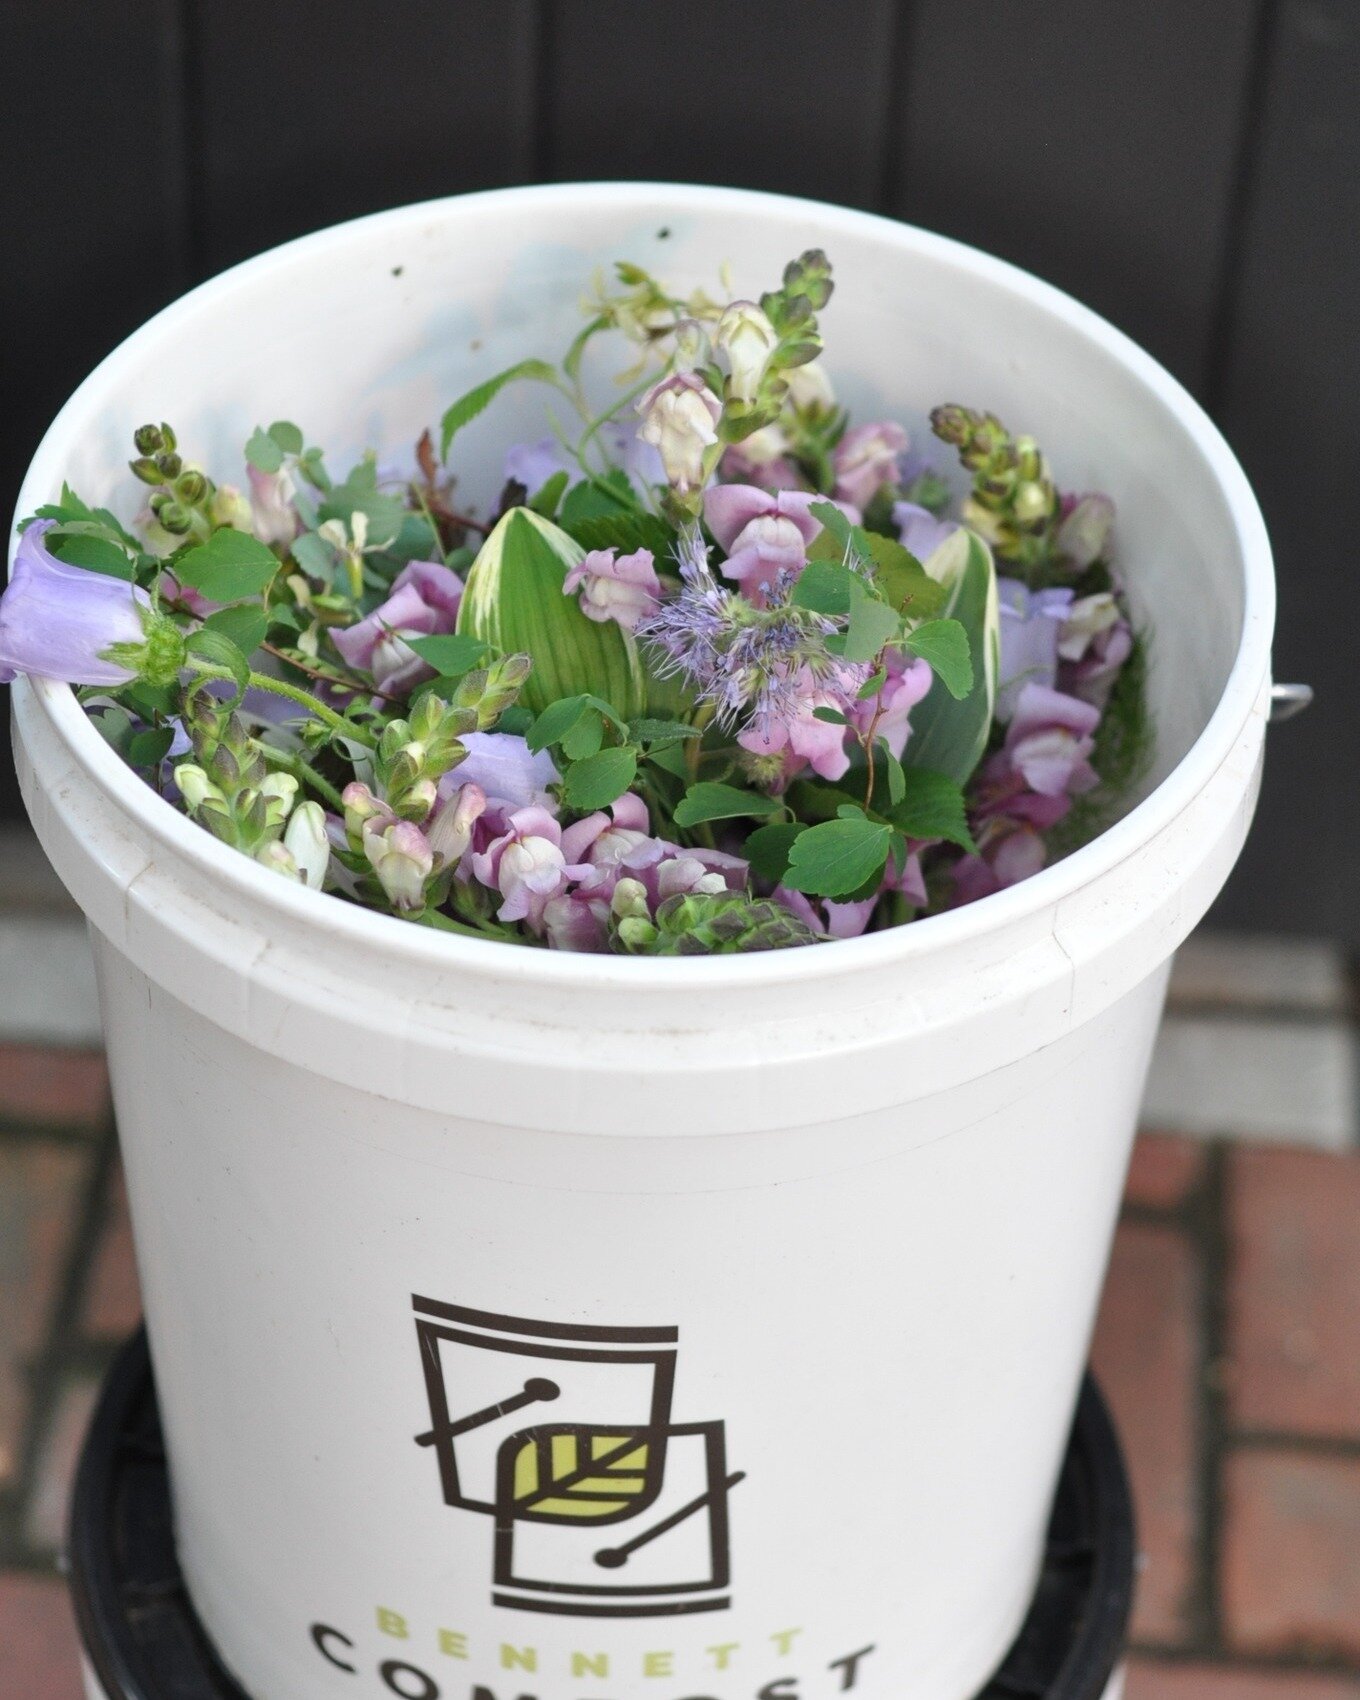 You can compost more than you think - including floral arrangements! What's on the list may surprise you, as will the difference composting makes: the average person throws out over 1600 lbs of &quot;garbage&quot; every year. Our composters throw out